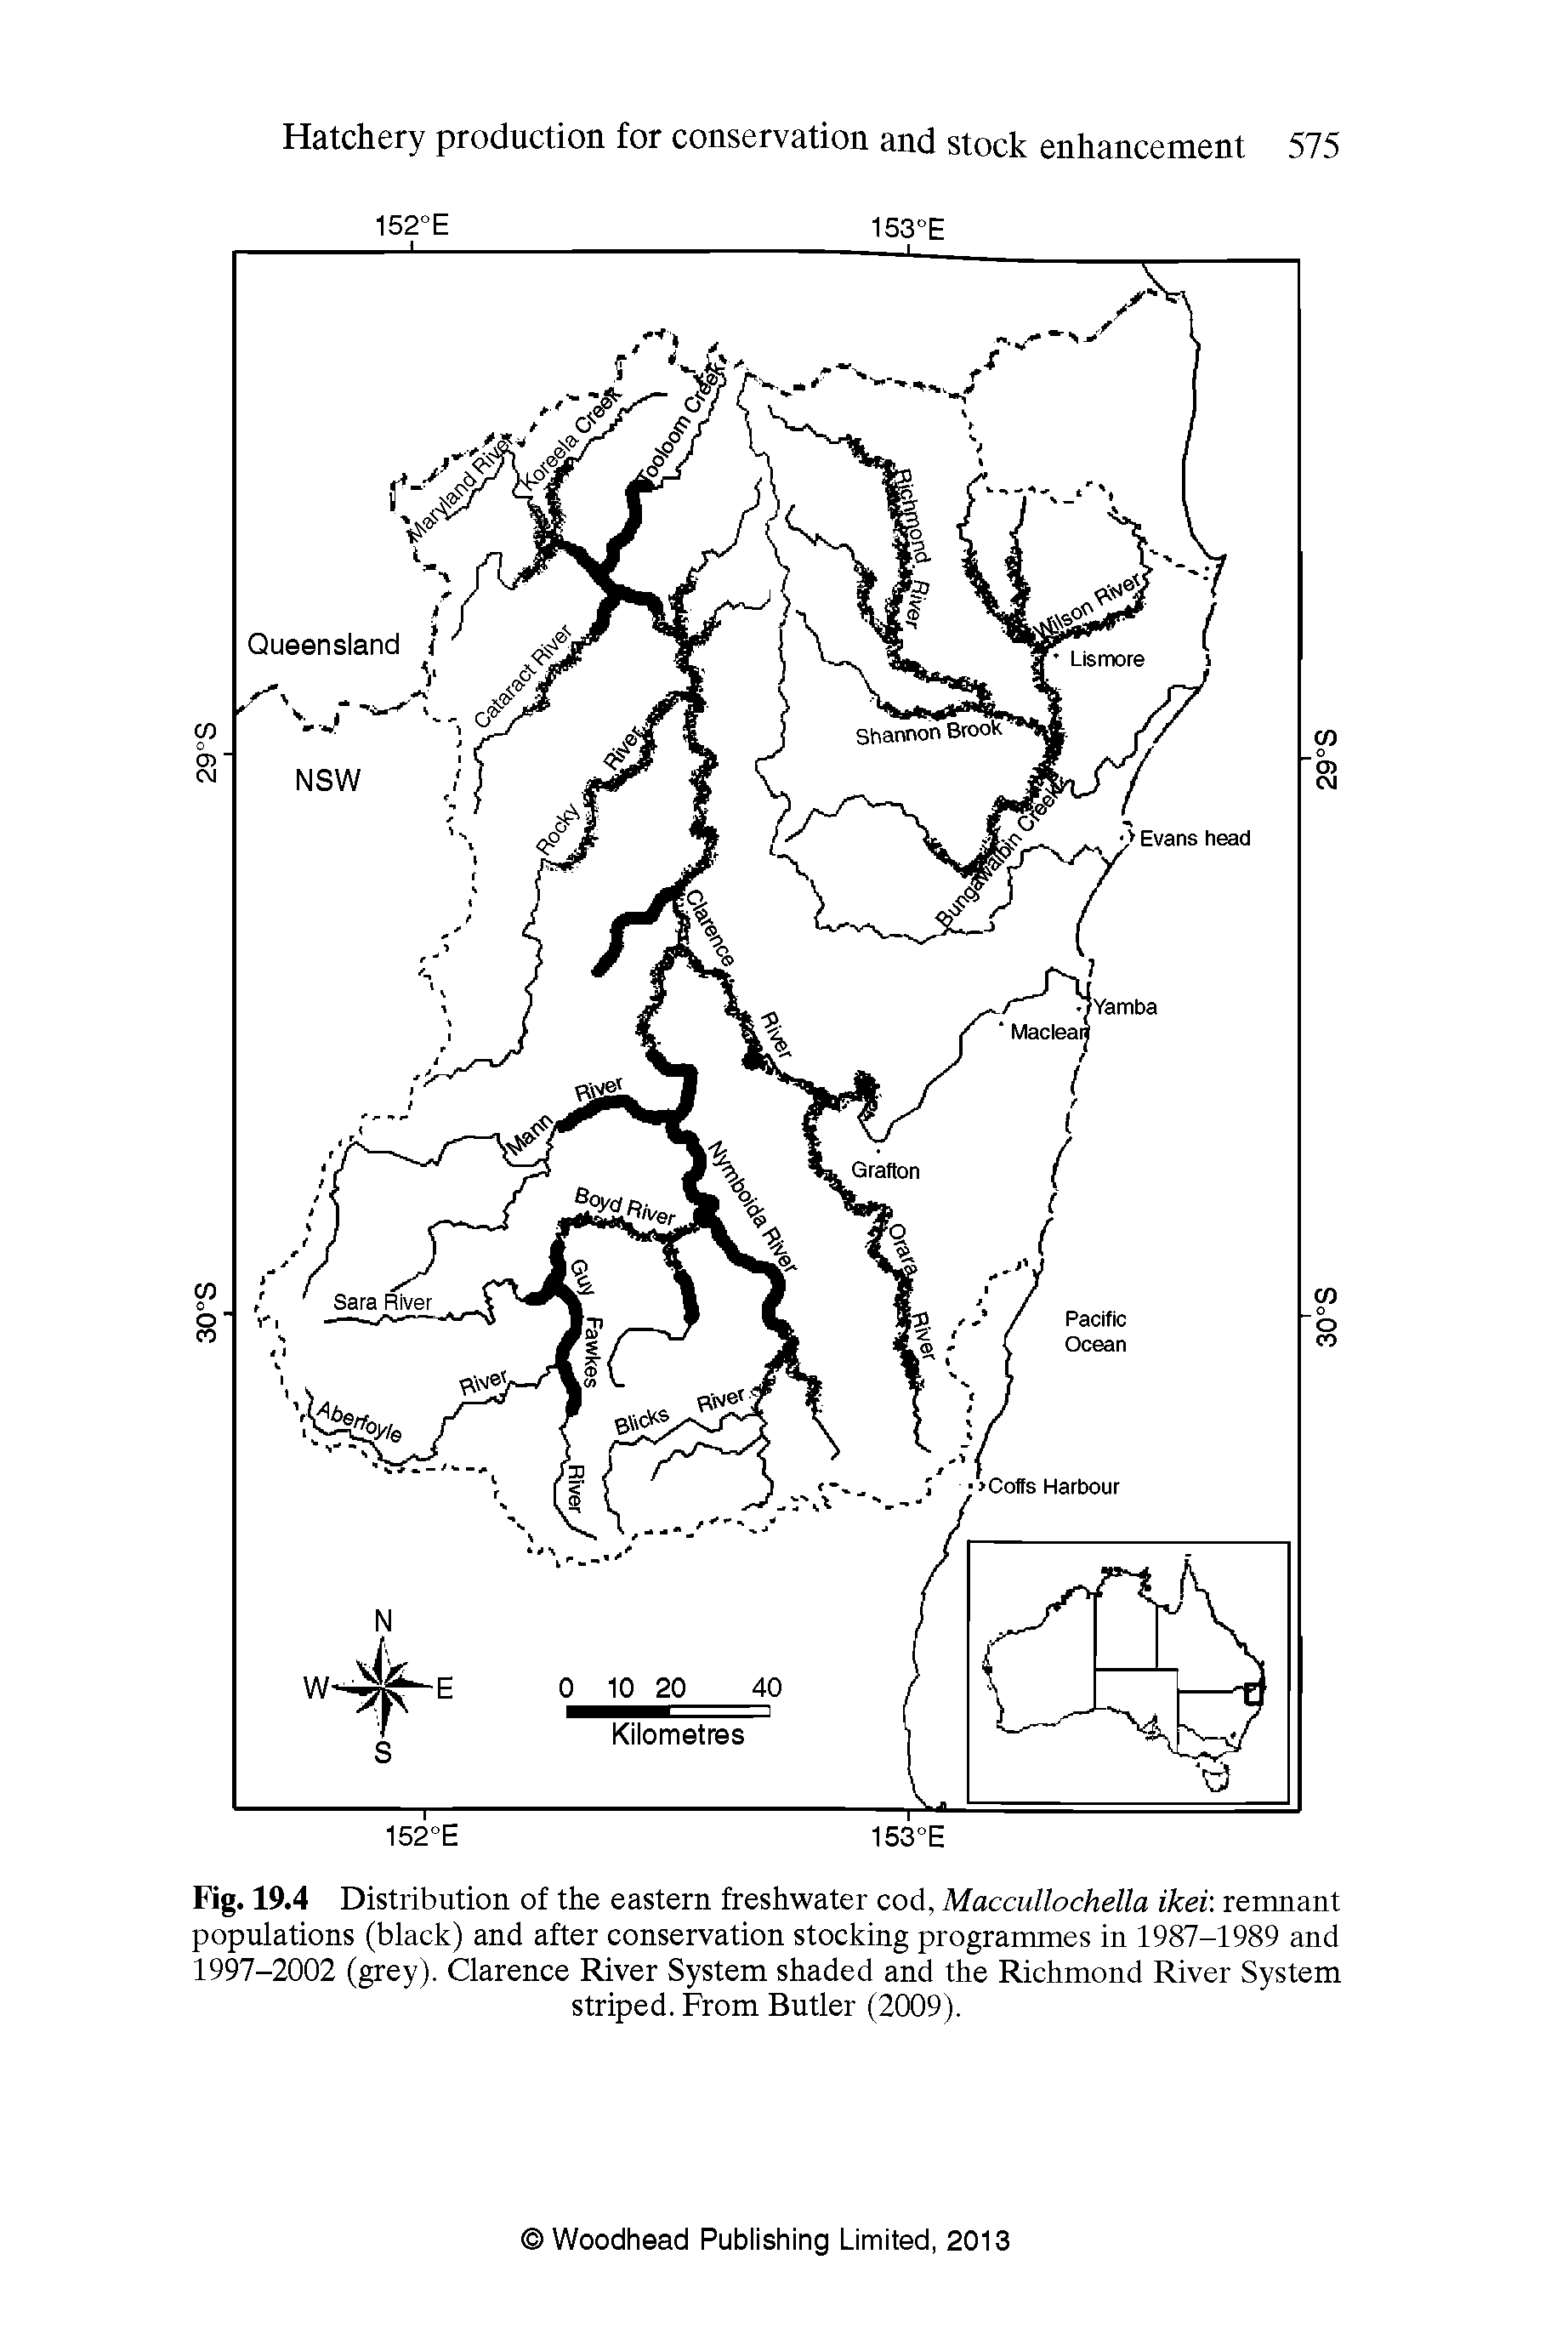 Fig. 19.4 Distribution of the eastern freshwater cod, Maccullochella ikei remnant populations (black) and after conservation stocking programmes in 1987-1989 and 1997-2002 (grey). Clarence River System shaded and the Richmond River System striped. From Butler (2009).